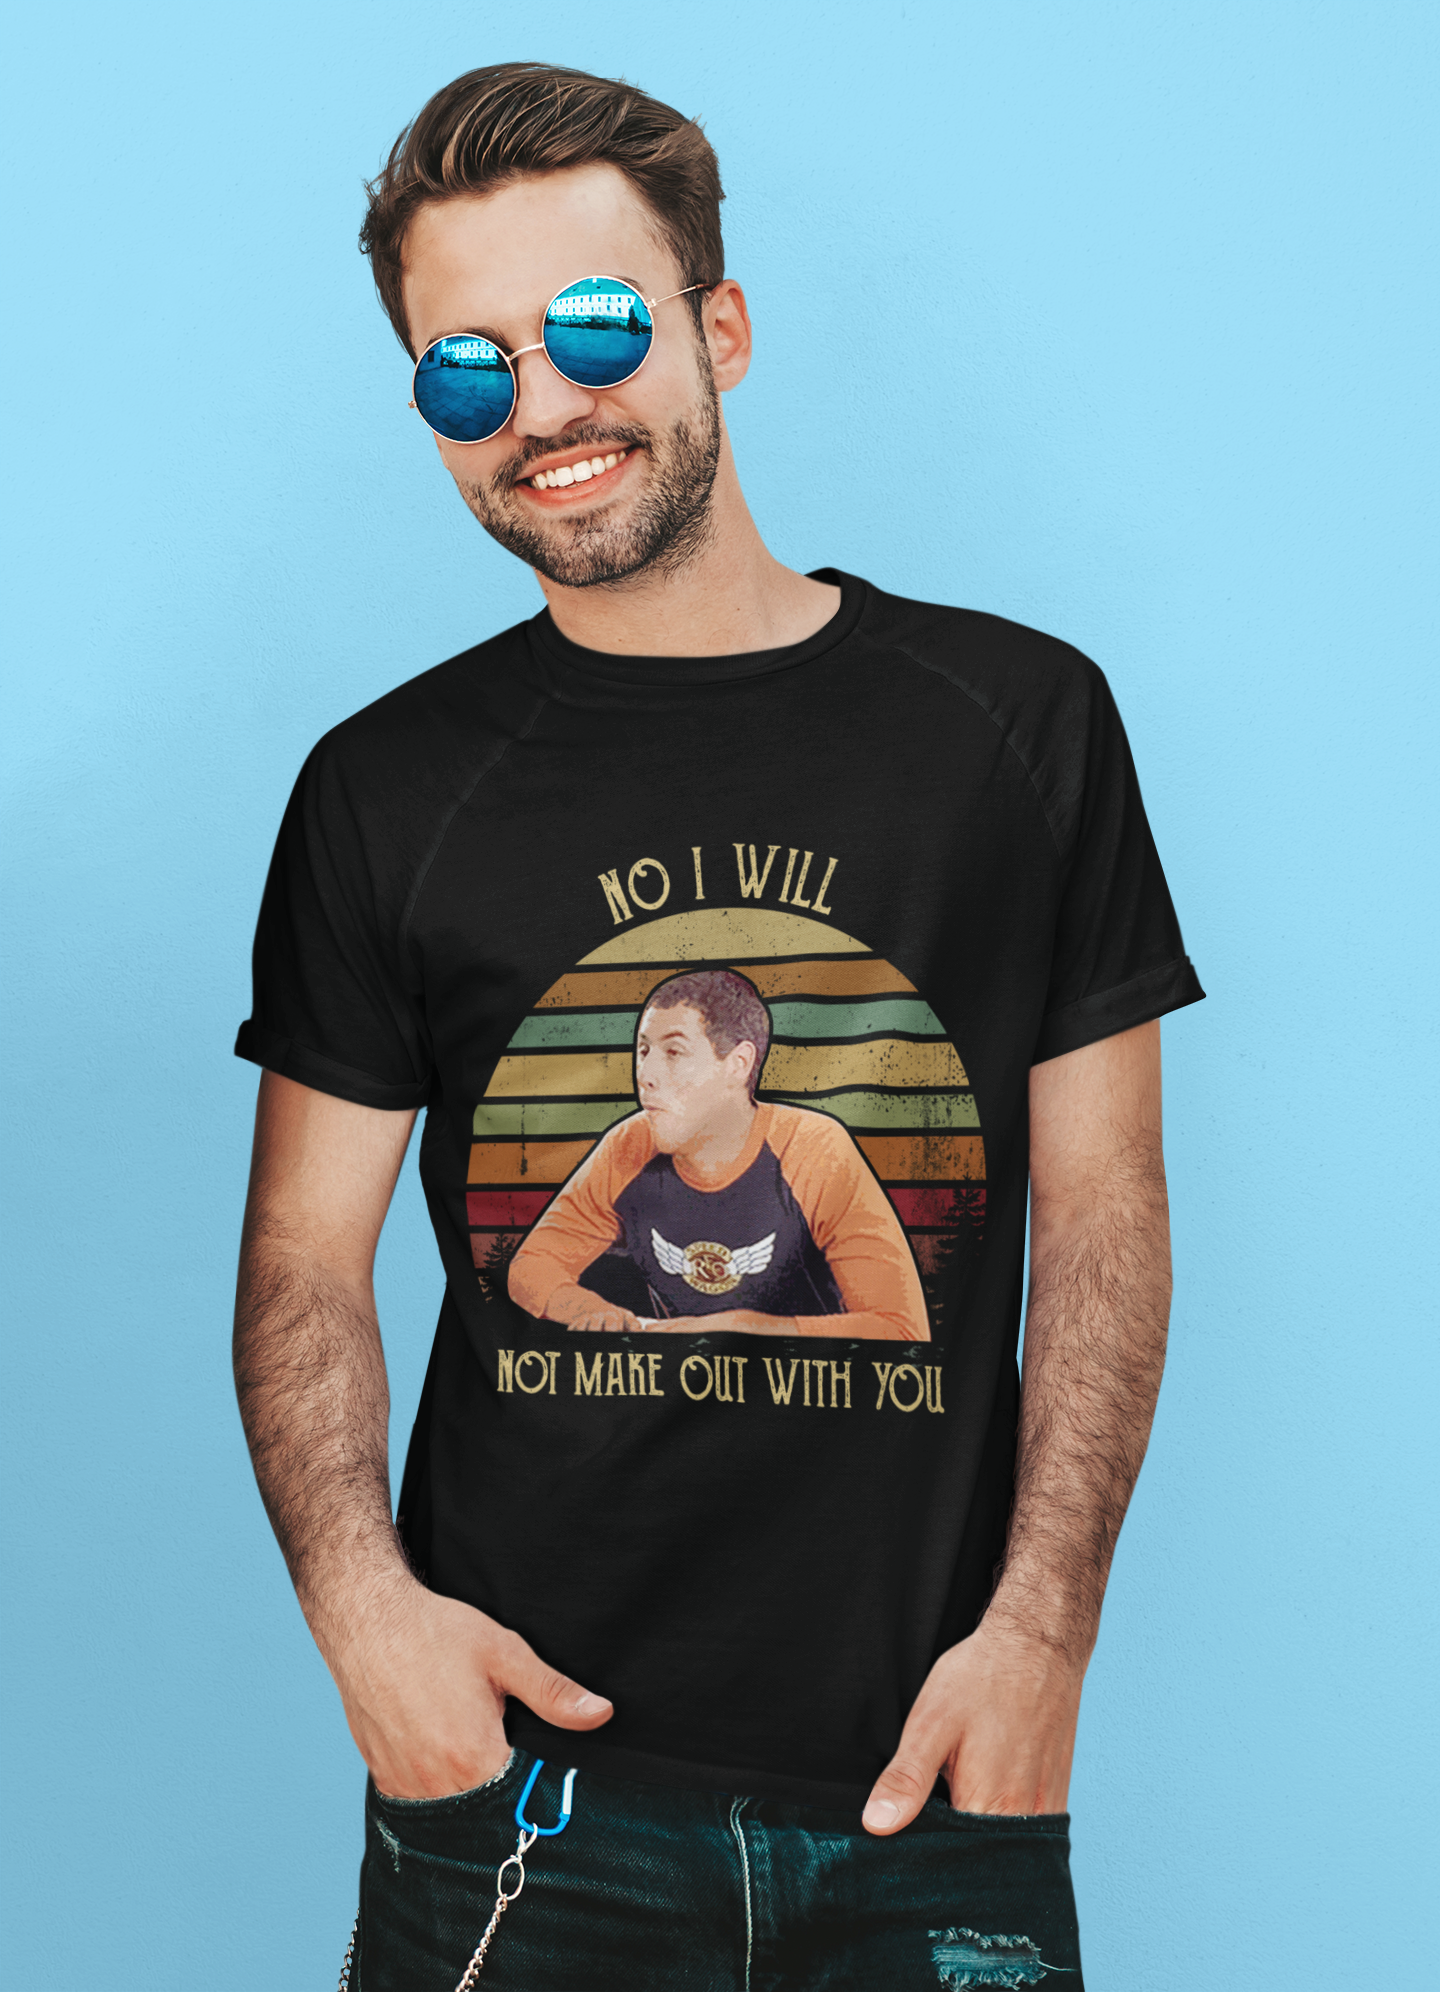 Billy Madison Comedy Film T Shirt, Billy Madison Tshirt, No I Will Not Make Out With You T Shirt